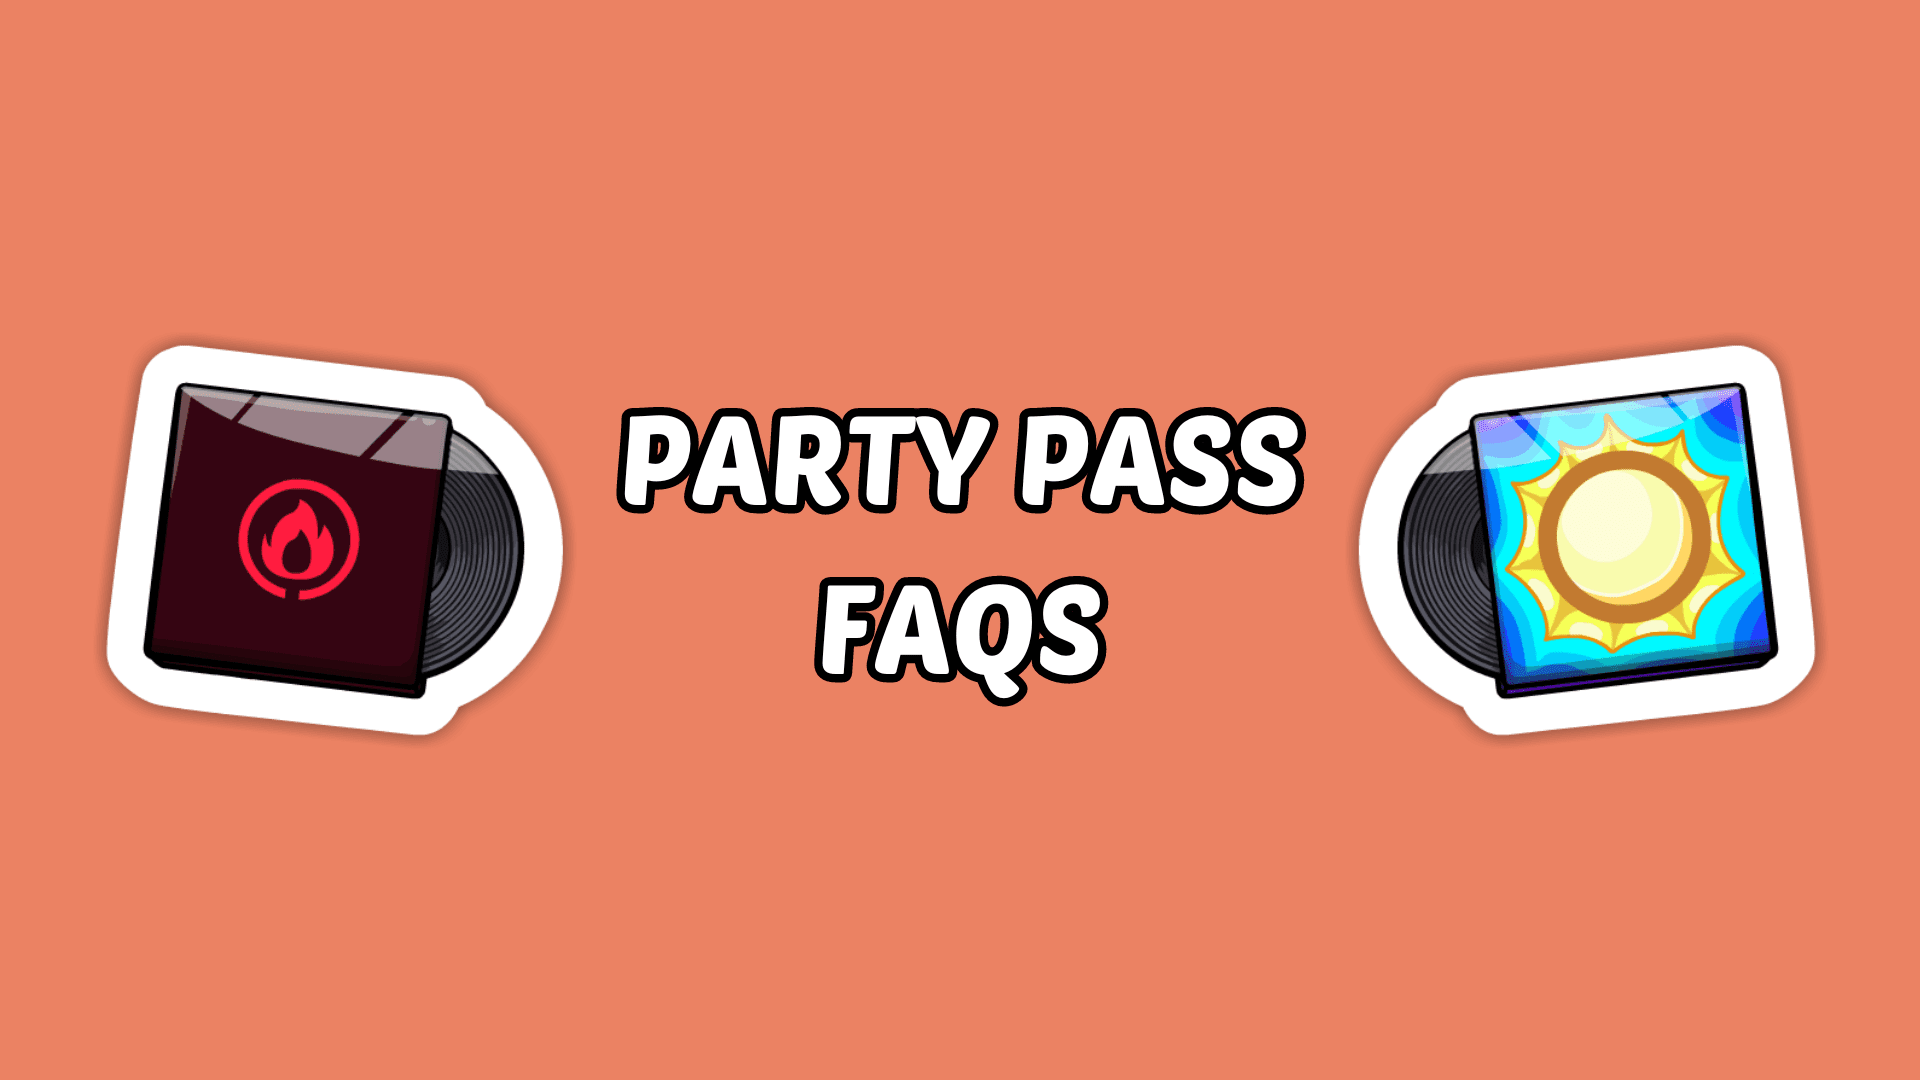 Party Pass FAQs with Fire Element and Soothing Sunshine vinyl record icons against a peach background.